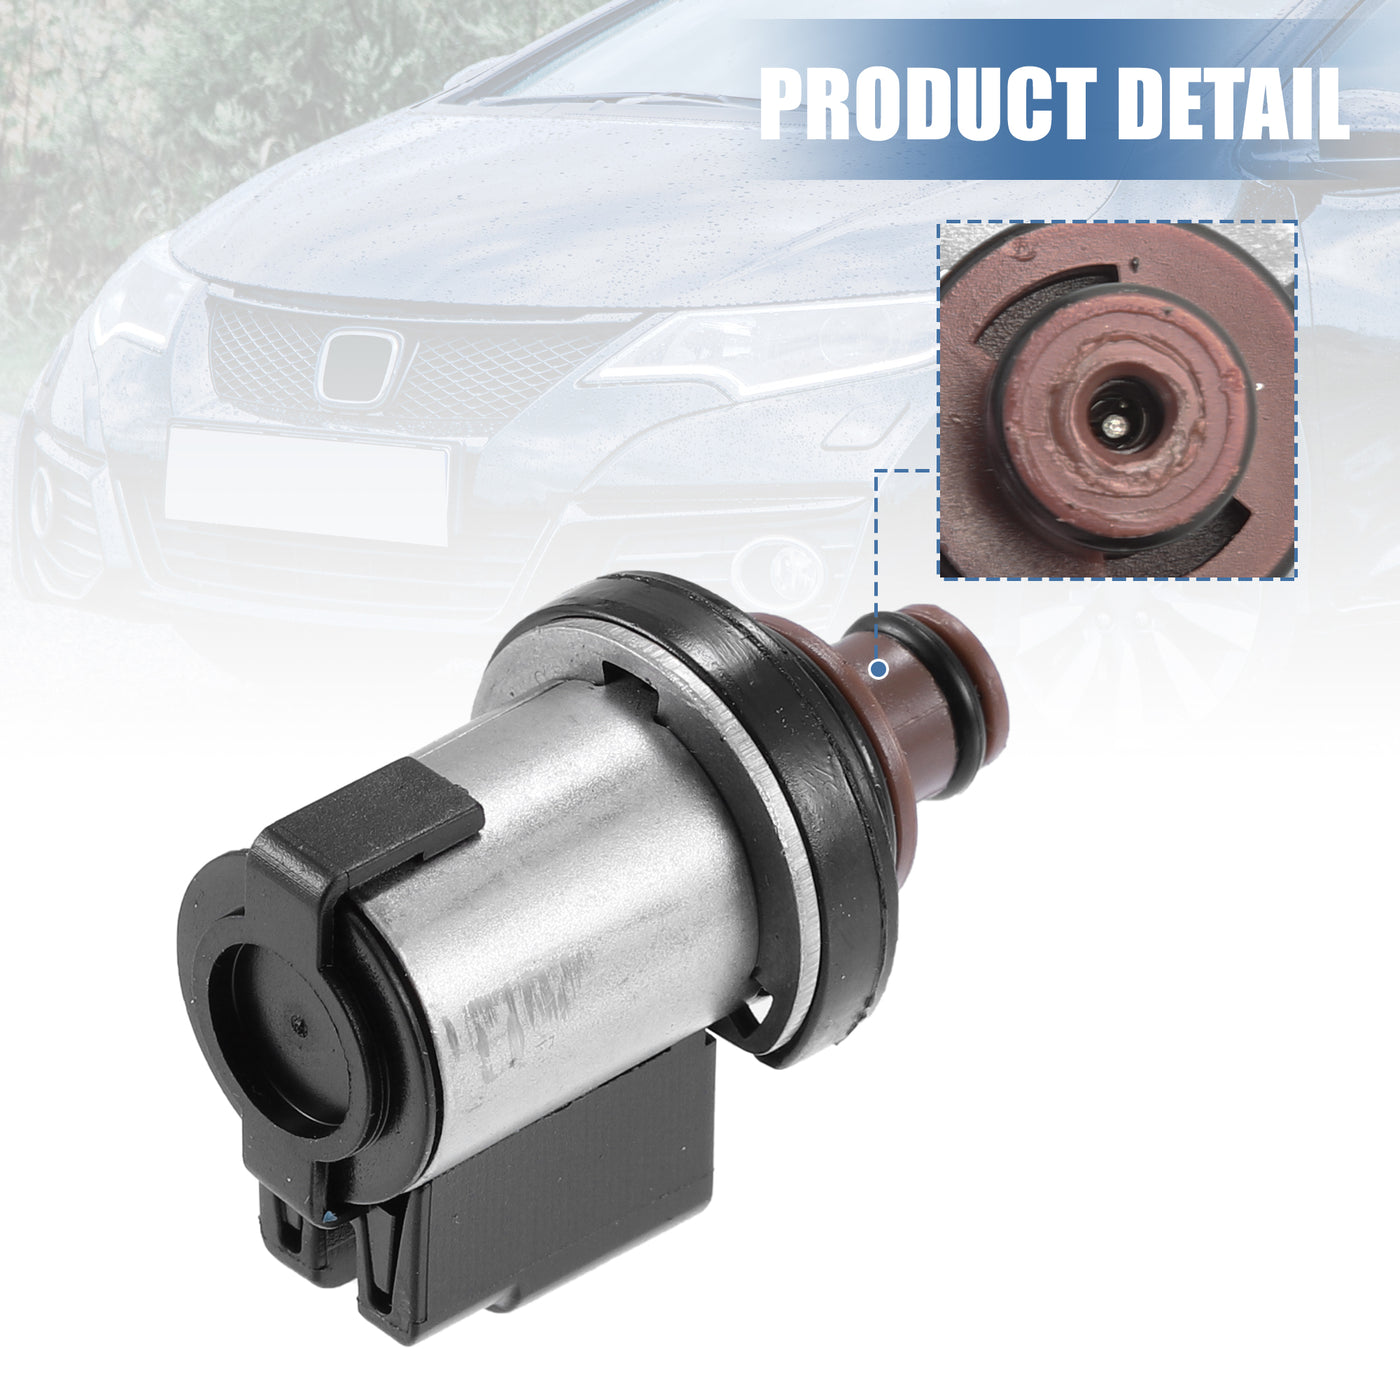 X AUTOHAUX Transmission Lock Up Clutch Dual Linear Shift Solenoid TR690 TR580 31825AA050 31825AA051 for Subaru Selected with CVT TR580 TR690 Transmission